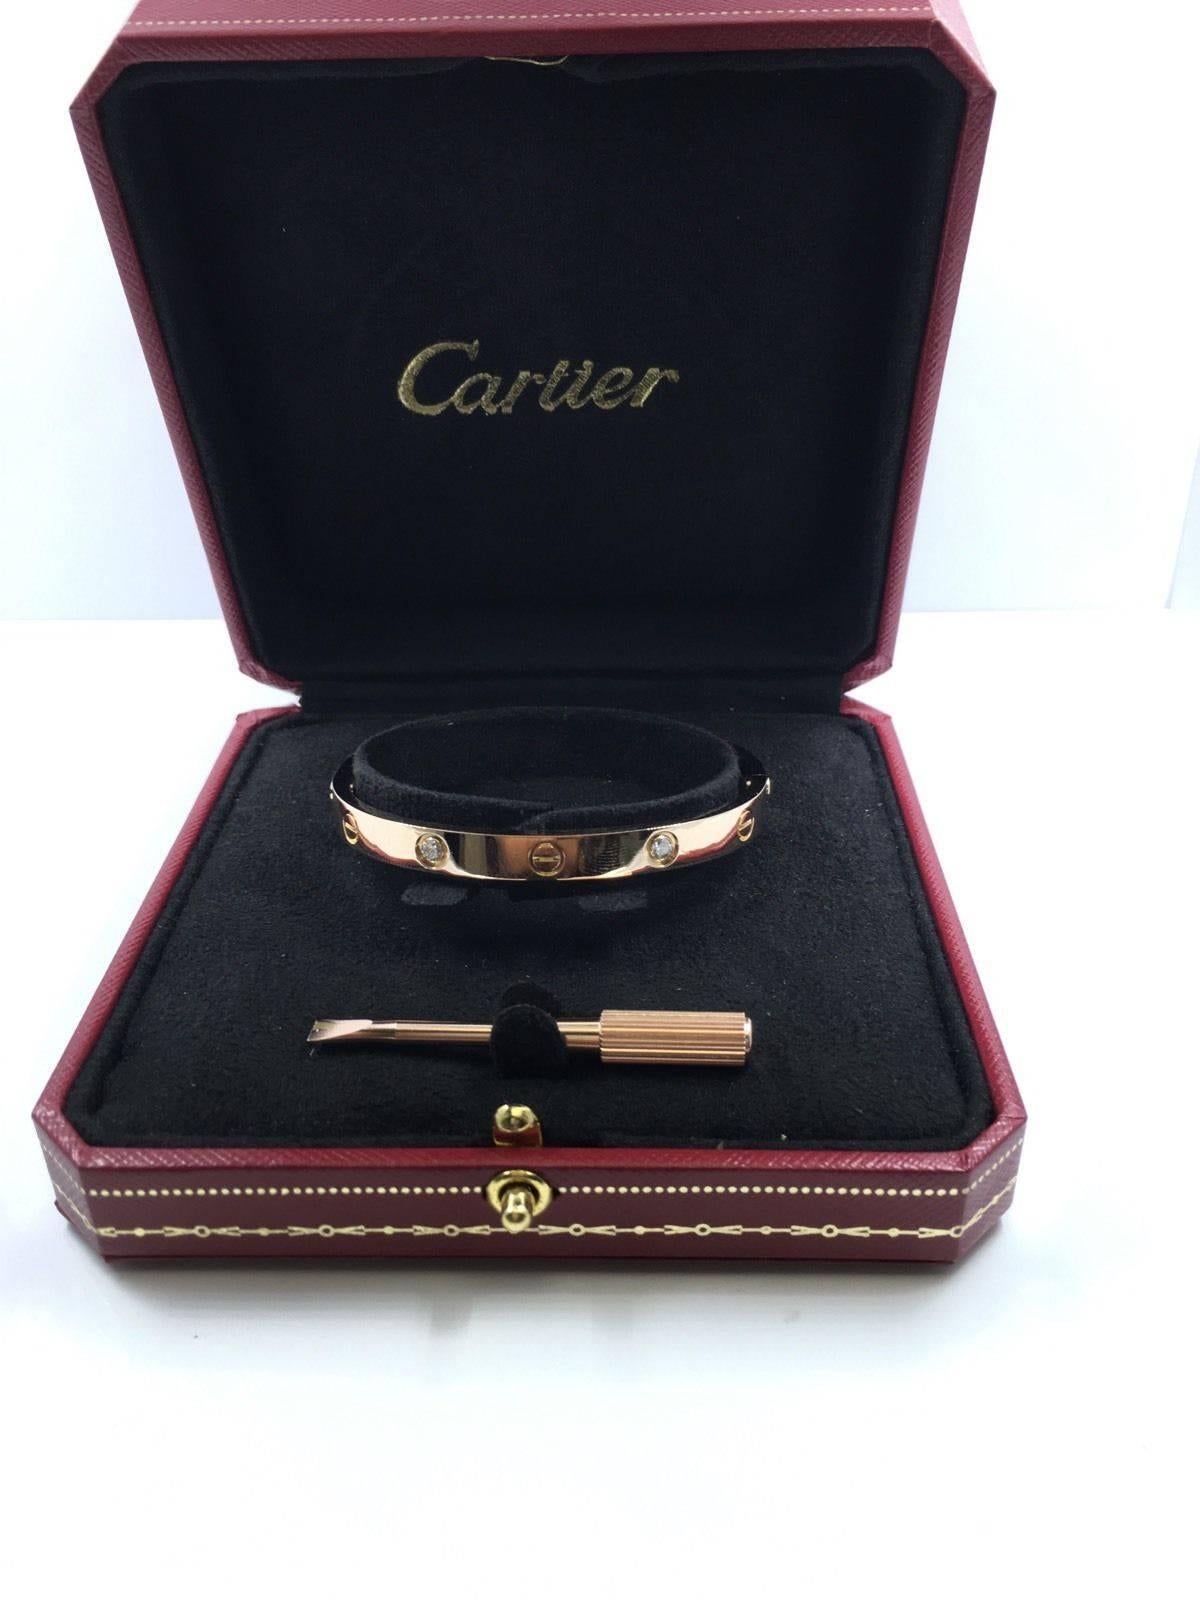 
This Cartier Love Bracelet, featuring 18k rose gold with 4 diamonds, is a classic, highly coveted Love bracelet by prestigious jeweler Cartier. This beautiful bracelet is a signature Cartier piece, and can be worn day and night. This bracelet was